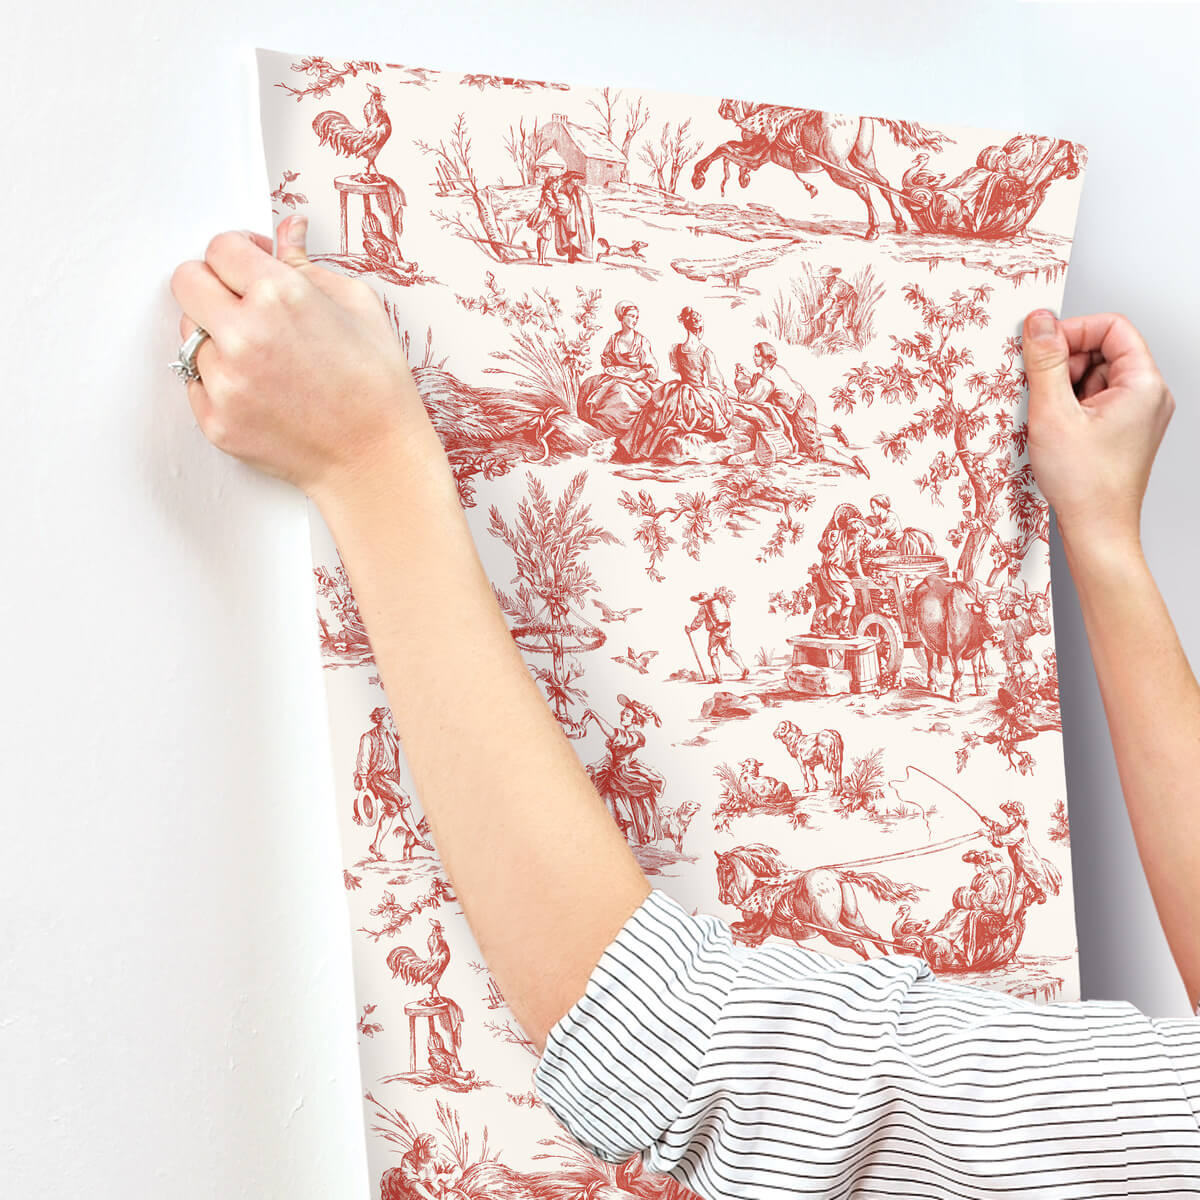 Toile Resource Library Seasons Toile Wallpaper - Red